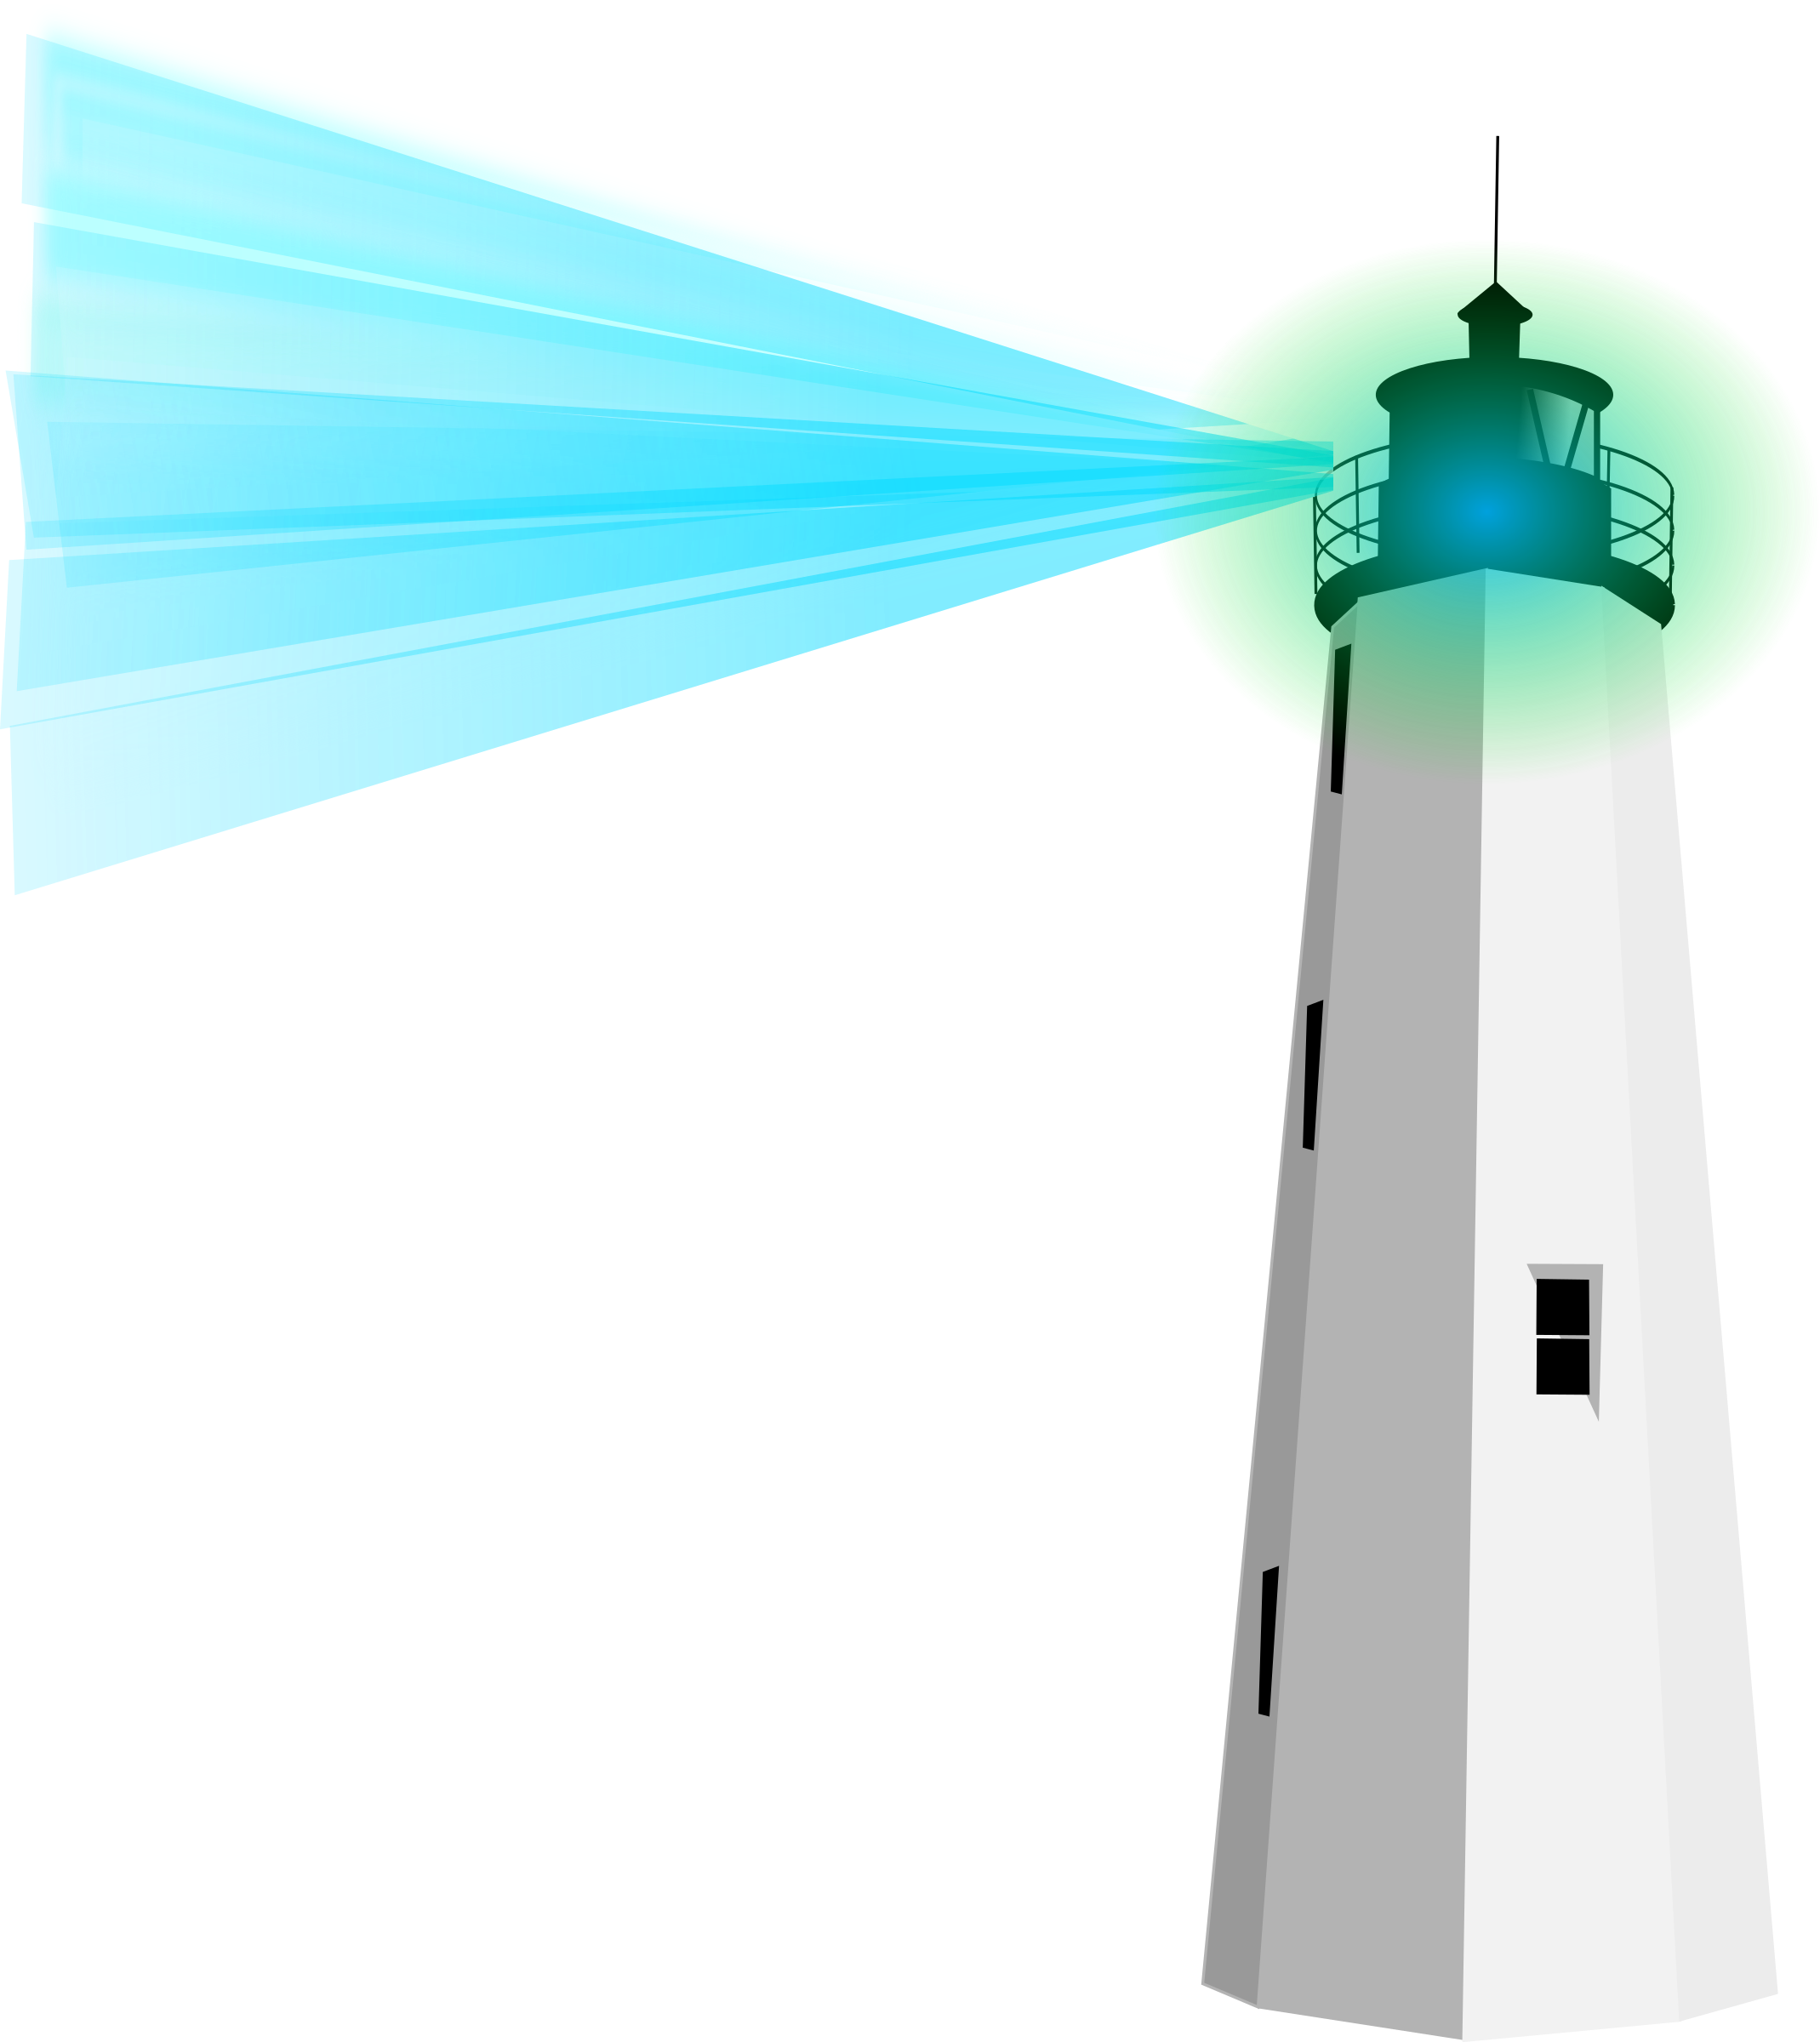 Colorized icons png free. Lighthouse clipart uses light